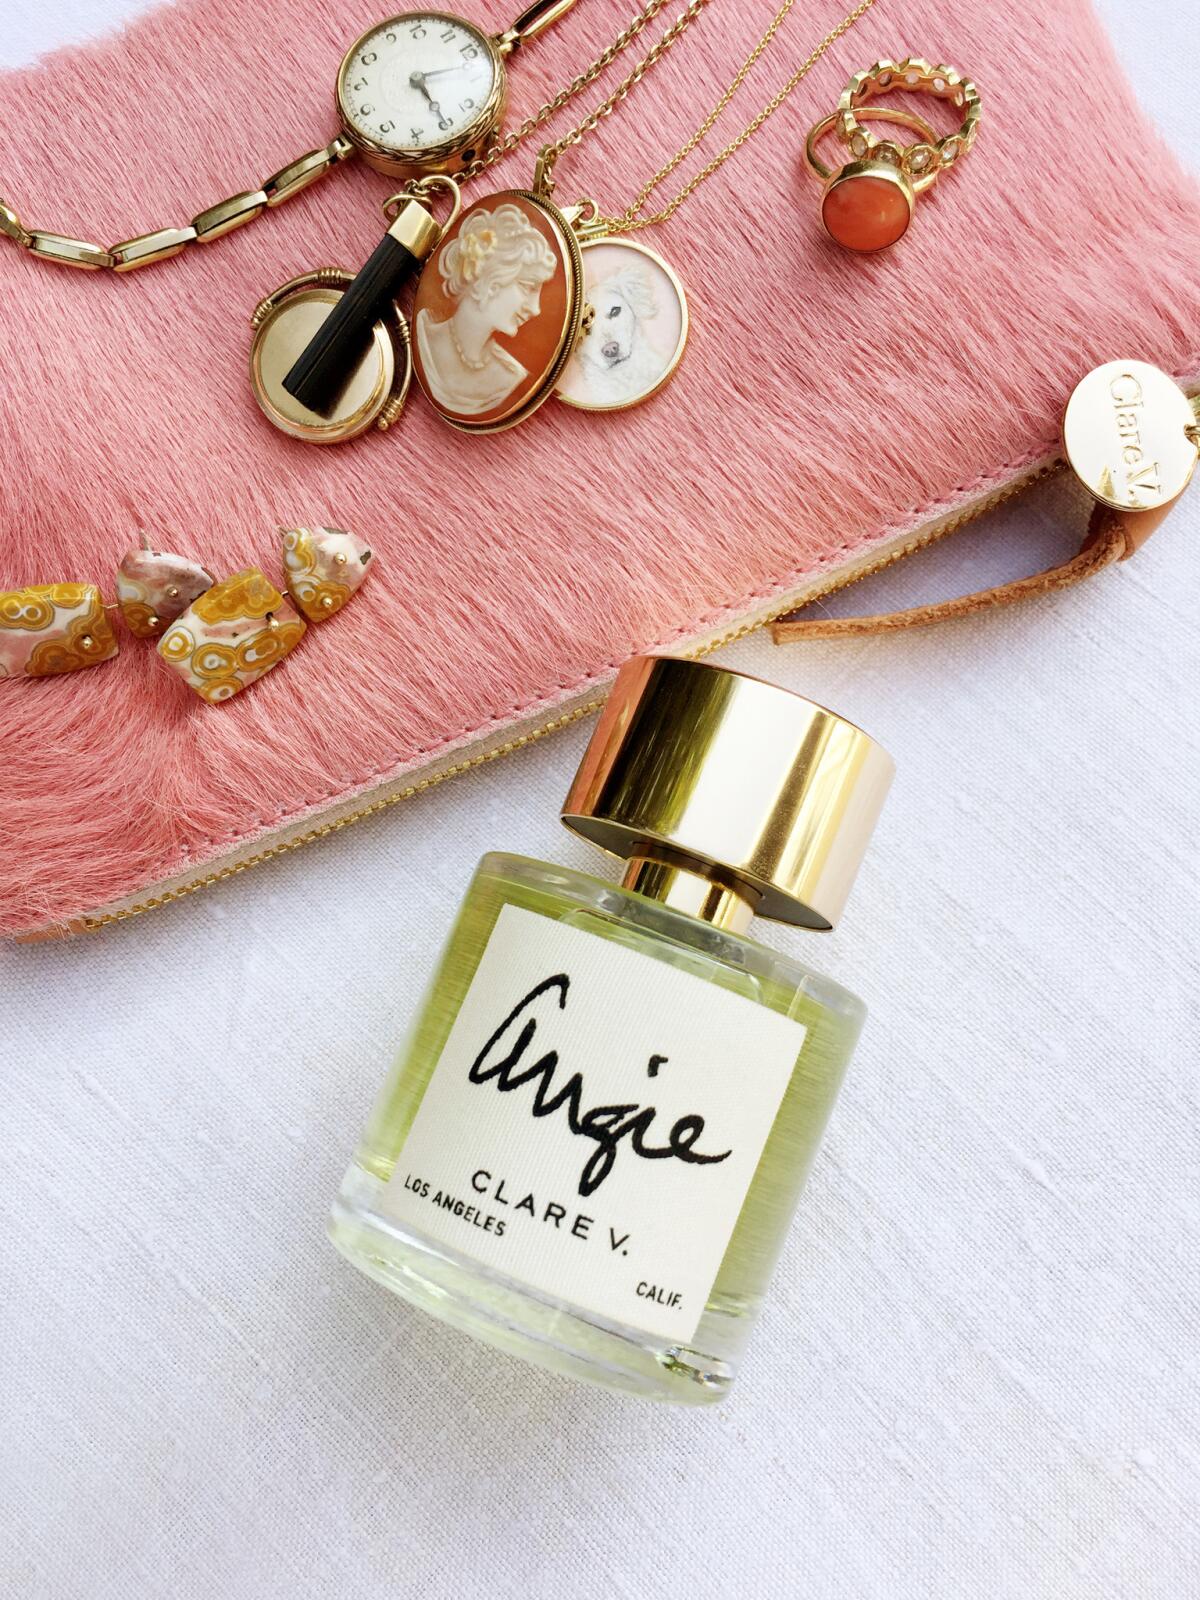 Designer Clare Vivier worked with Linda Sivrican from L.A.-based Capsule Parfumerie to create the fragrance called Angie, which was introduced in November.